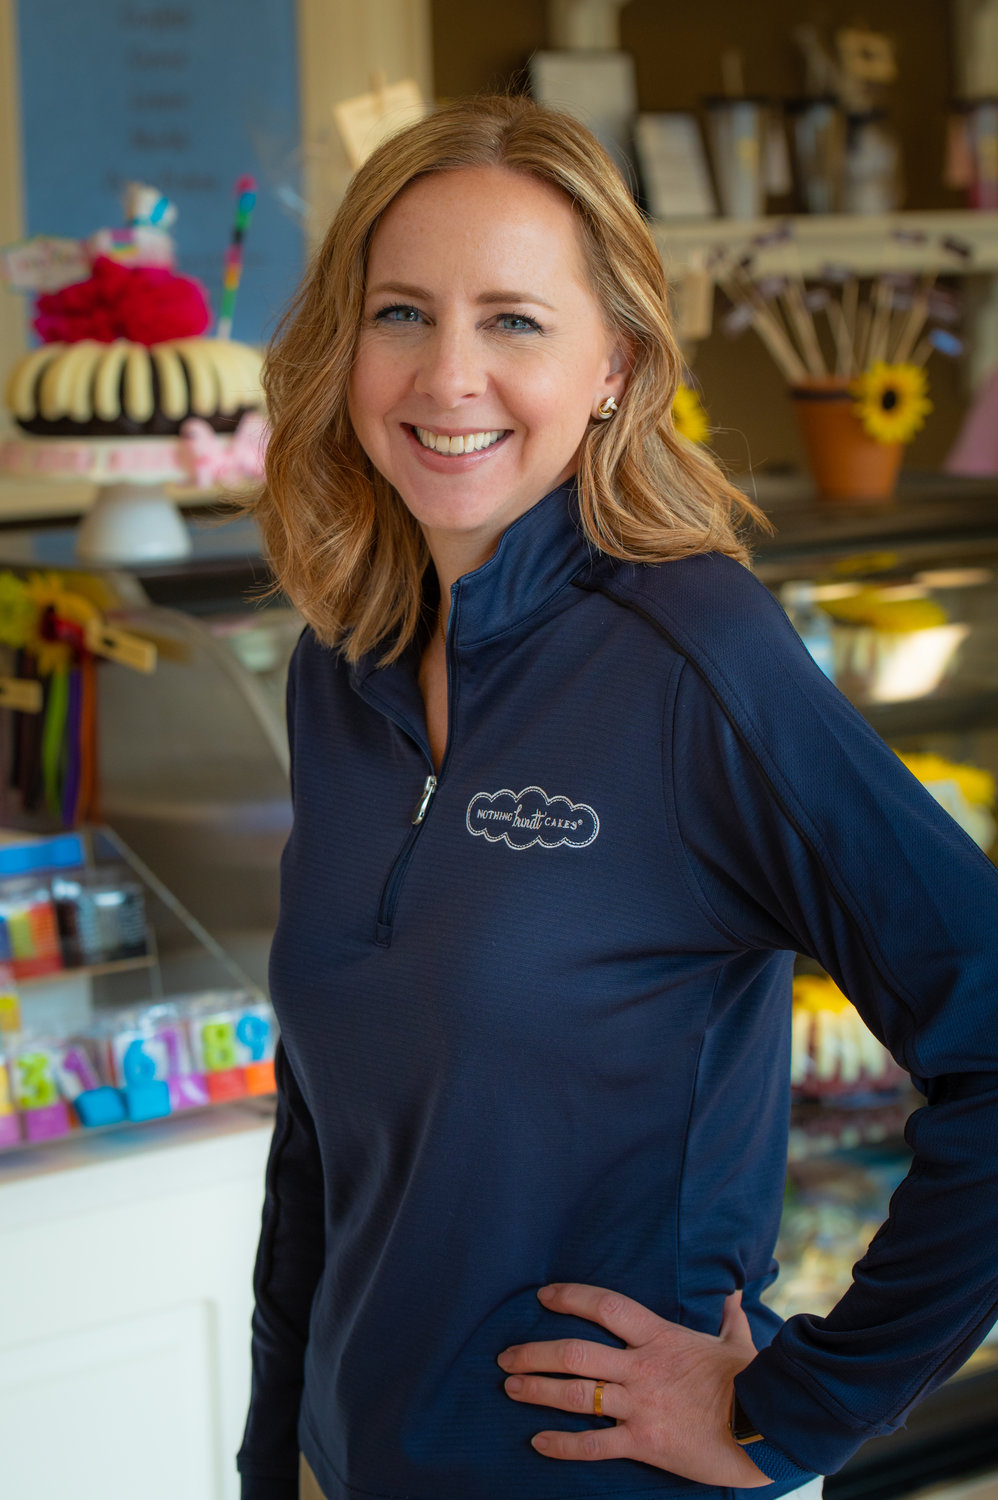 Jocelyn King, mom of four and teacher-turned entrepreneur is pursuing her passion for baking.